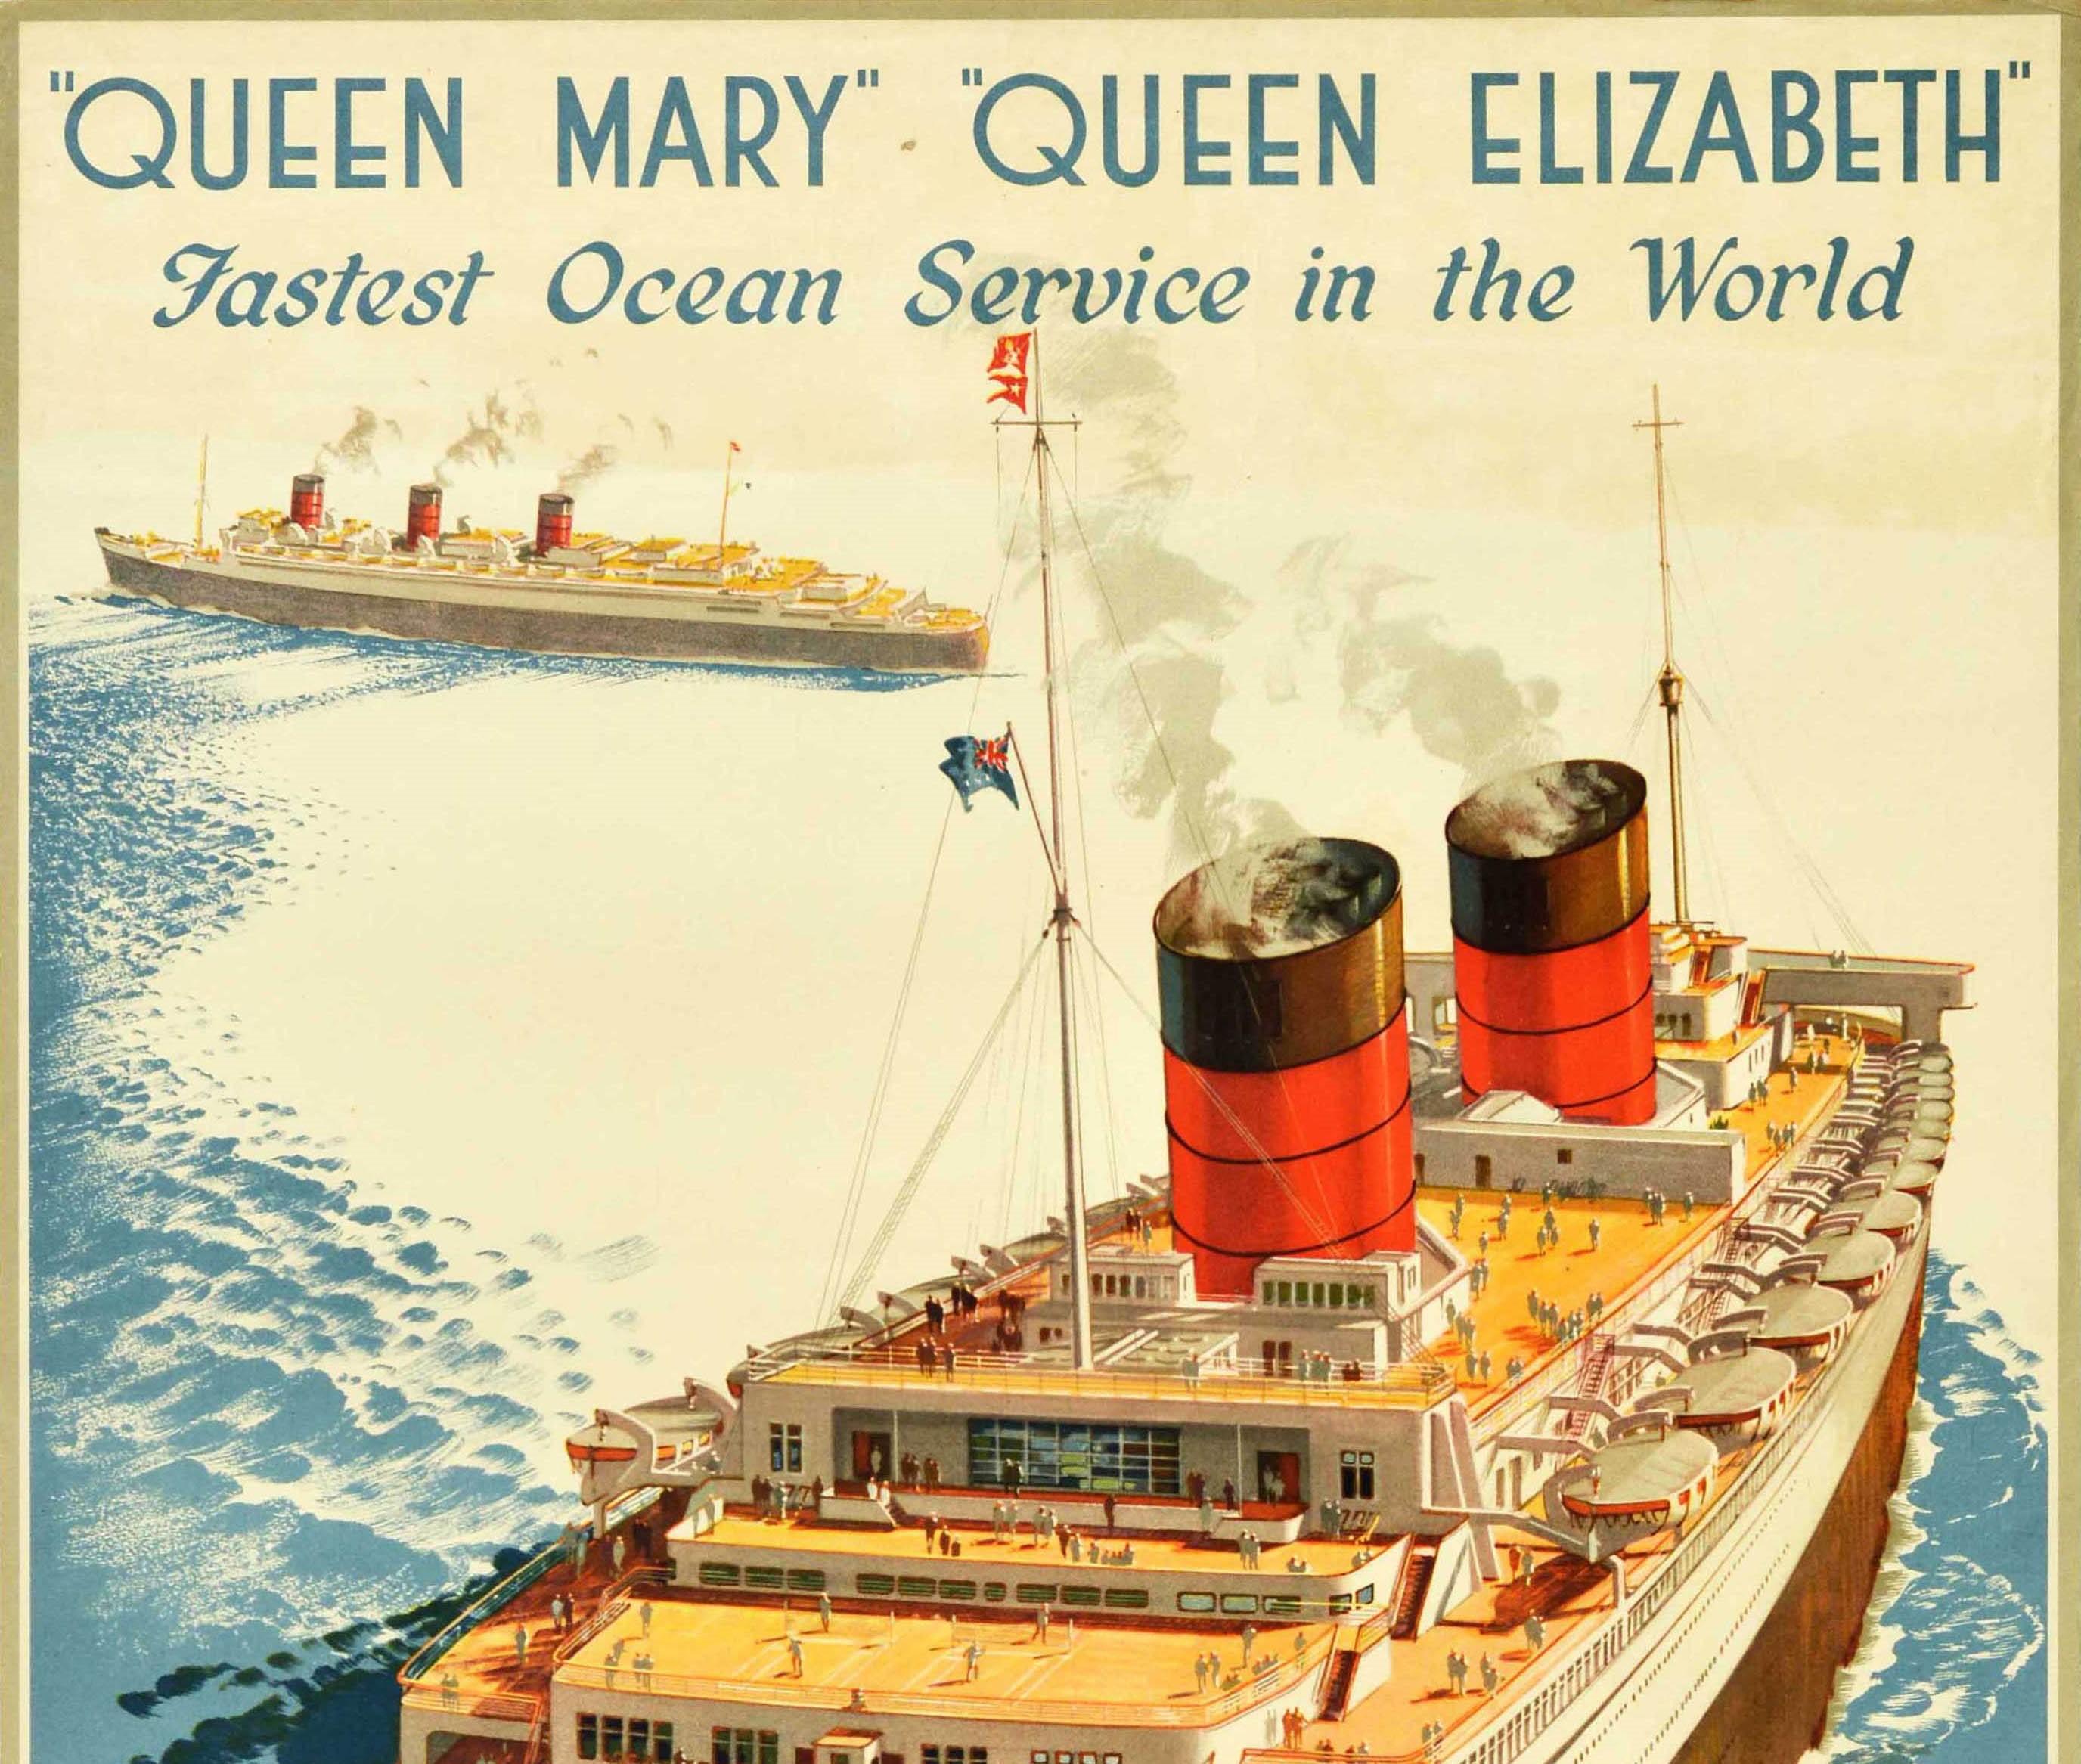 Original vintage cruise travel poster - Queen Mary Queen Elizabeth Fastest Ocean Service in the World Cunard White Star - featuring a colourful image of the two ocean liners at sea showing passengers enjoying their cruise on the decks of the Queen